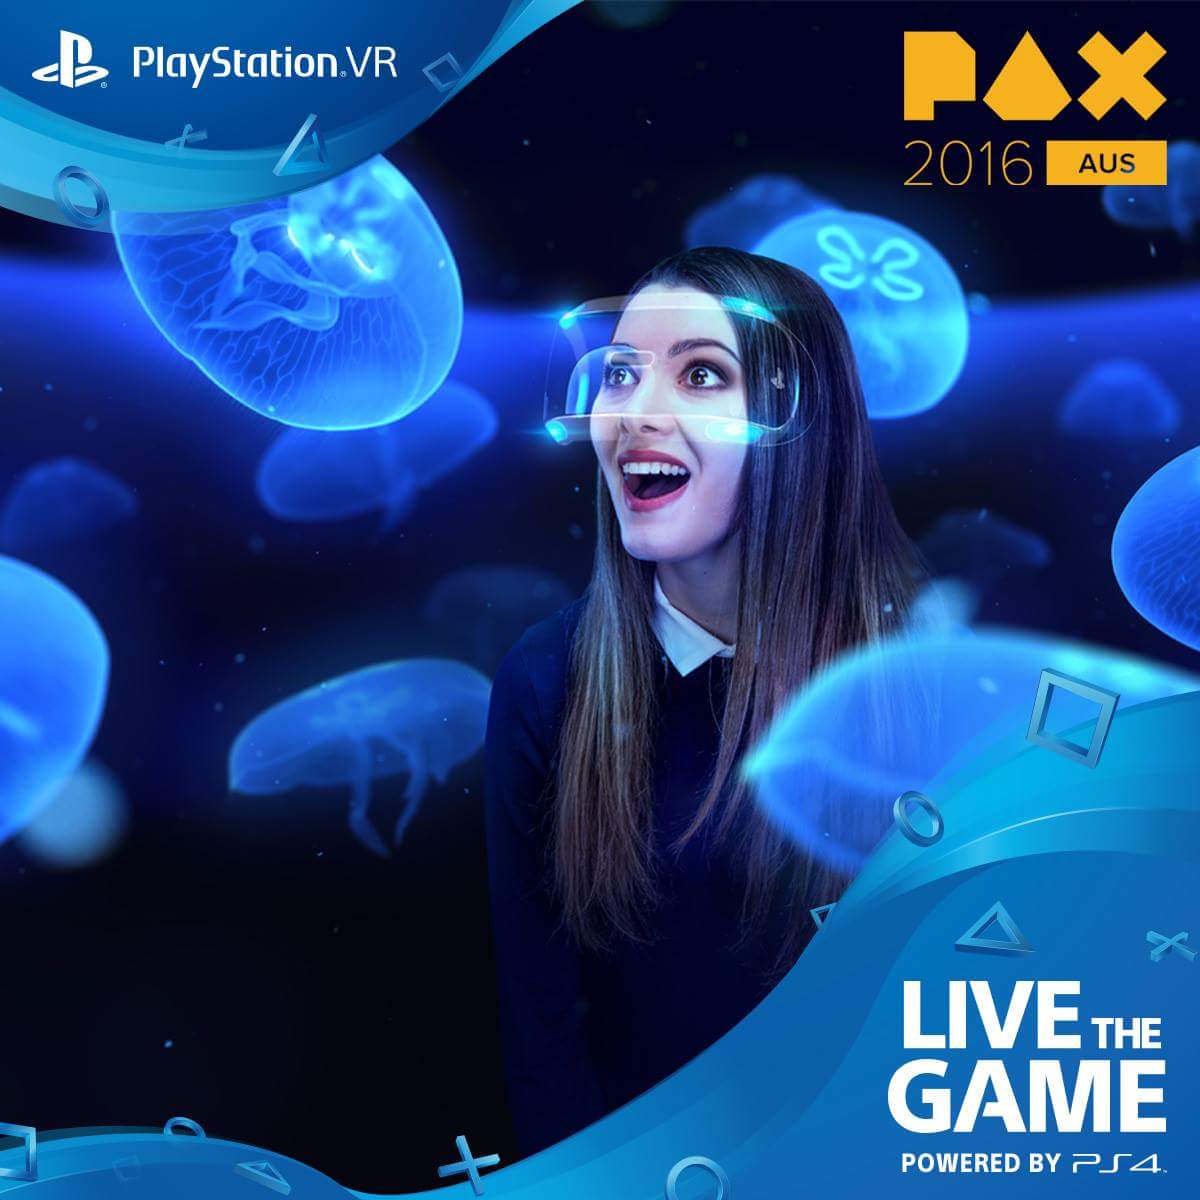 Book Yourself In To Try Playstation VR At PAX 2016